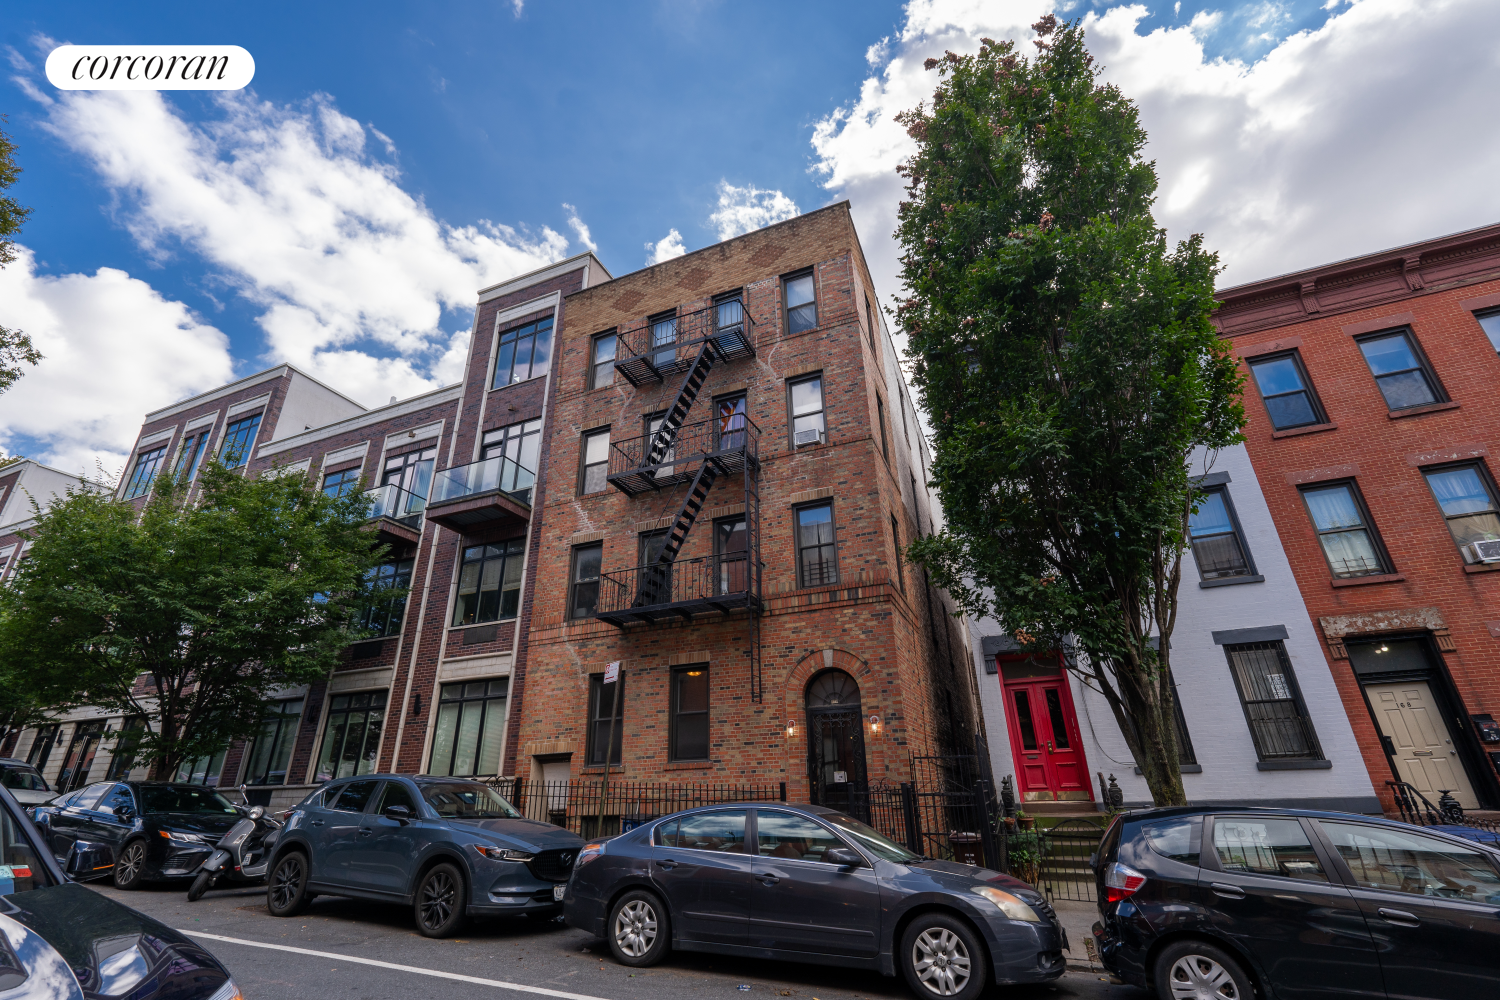 174 15th Street 1, South Slope, Brooklyn, New York - 16 Bedrooms  
8 Bathrooms  
36 Rooms - 